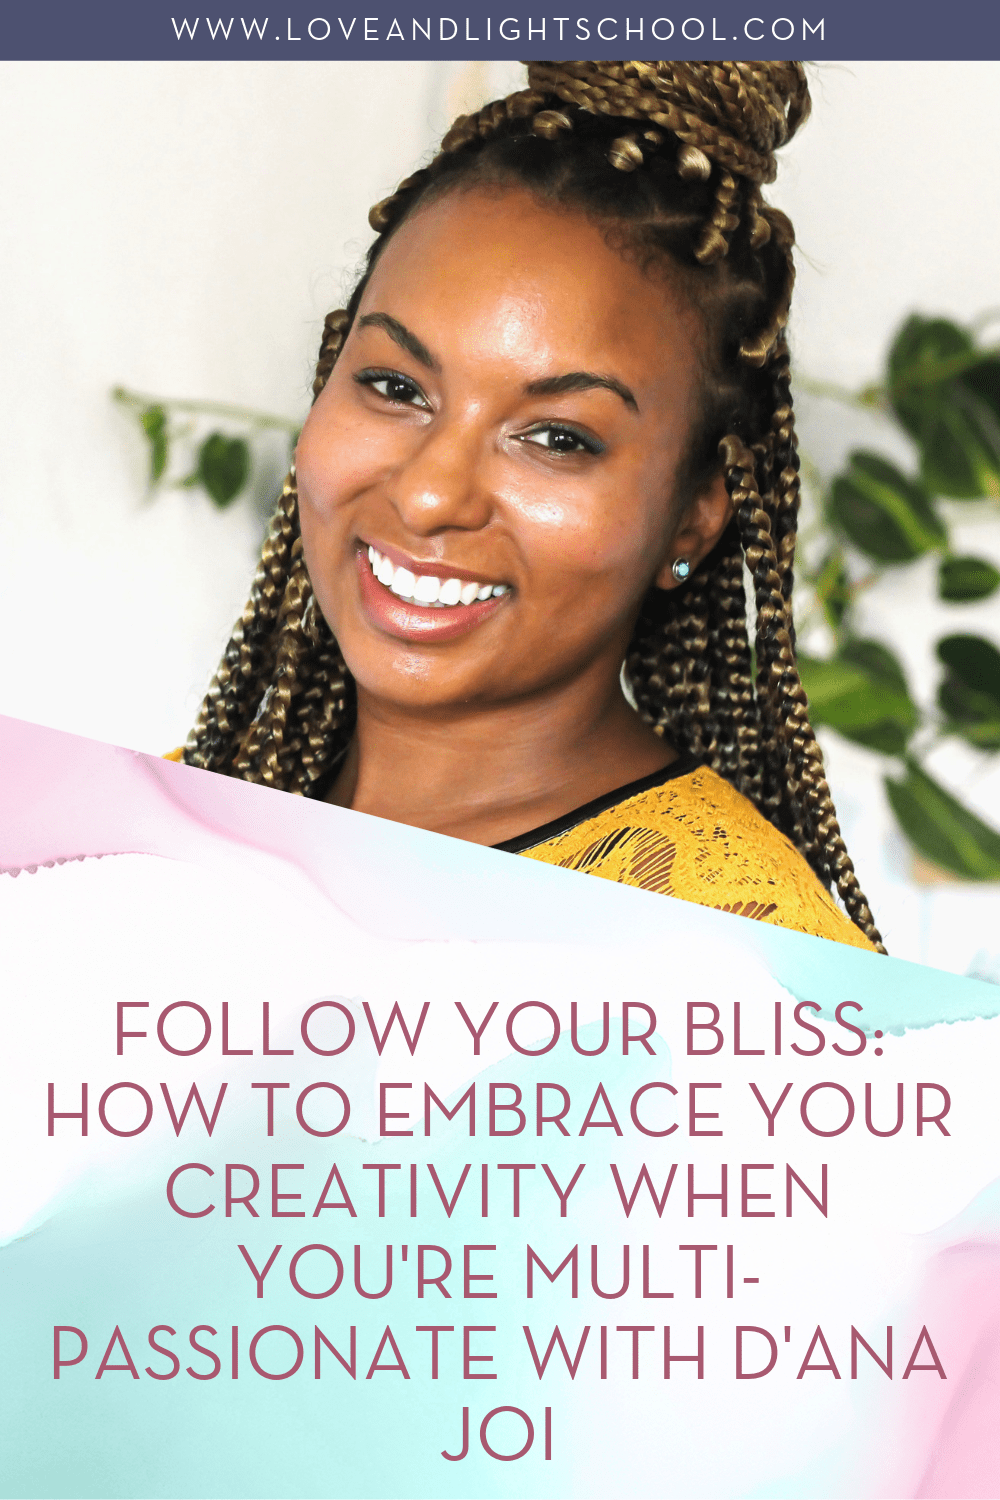 Follow Your Bliss: How to Embrace Your Creativity When You're Multi-Passionate with D'Ana Joi